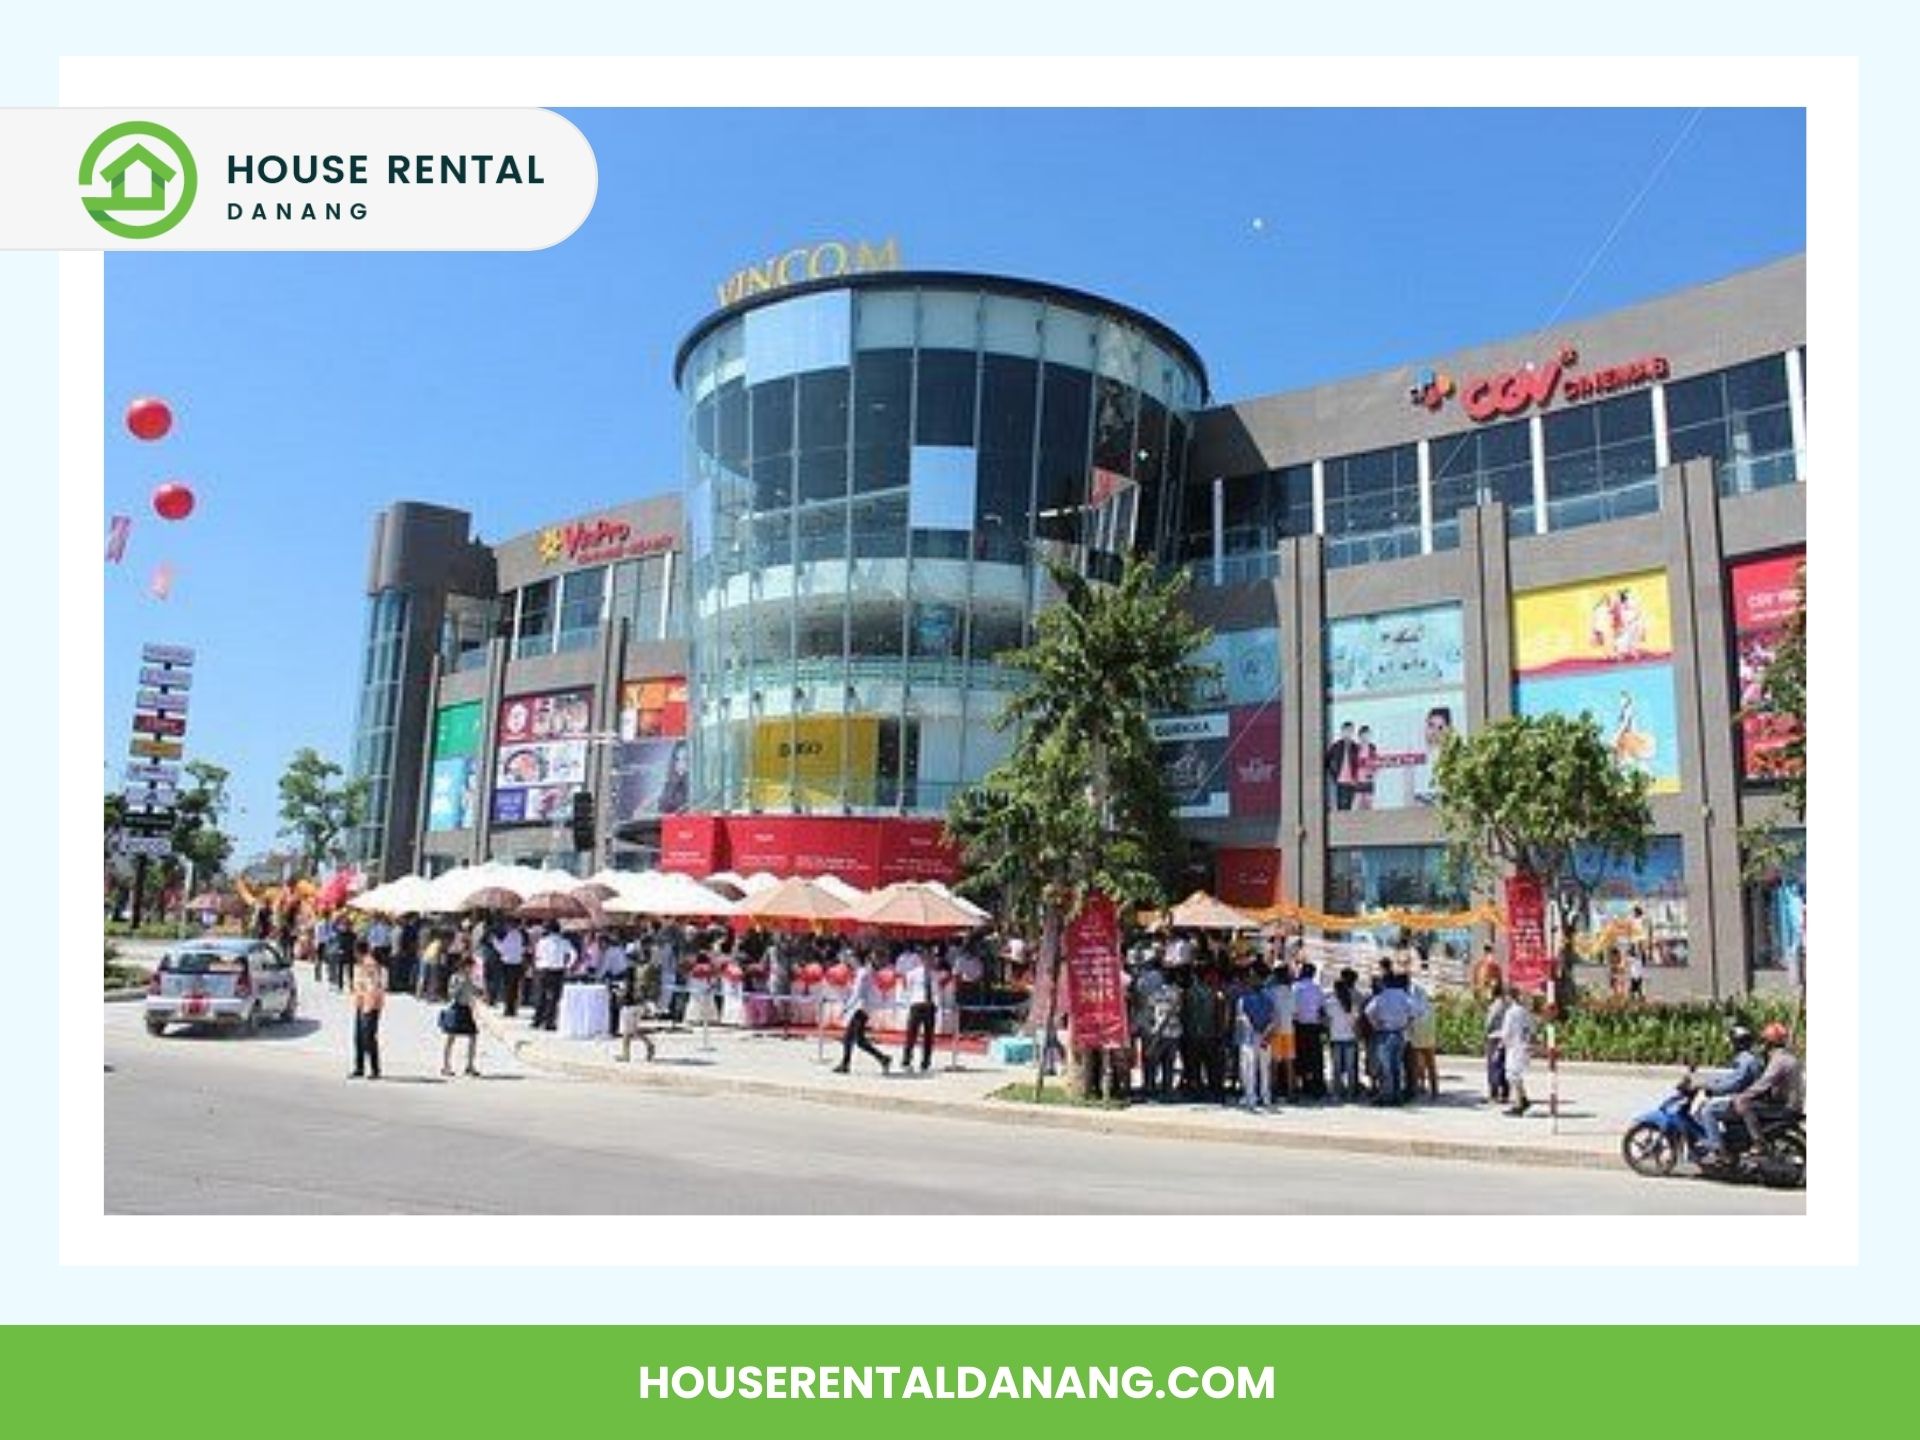 A large commercial building with a "Vincom" sign stands prominently, attracting people gathered under white tents. Various storefronts invite shoppers. The image reads "House Rental Danang" with a website link. Discover one of the best places for shopping in Da Nang!